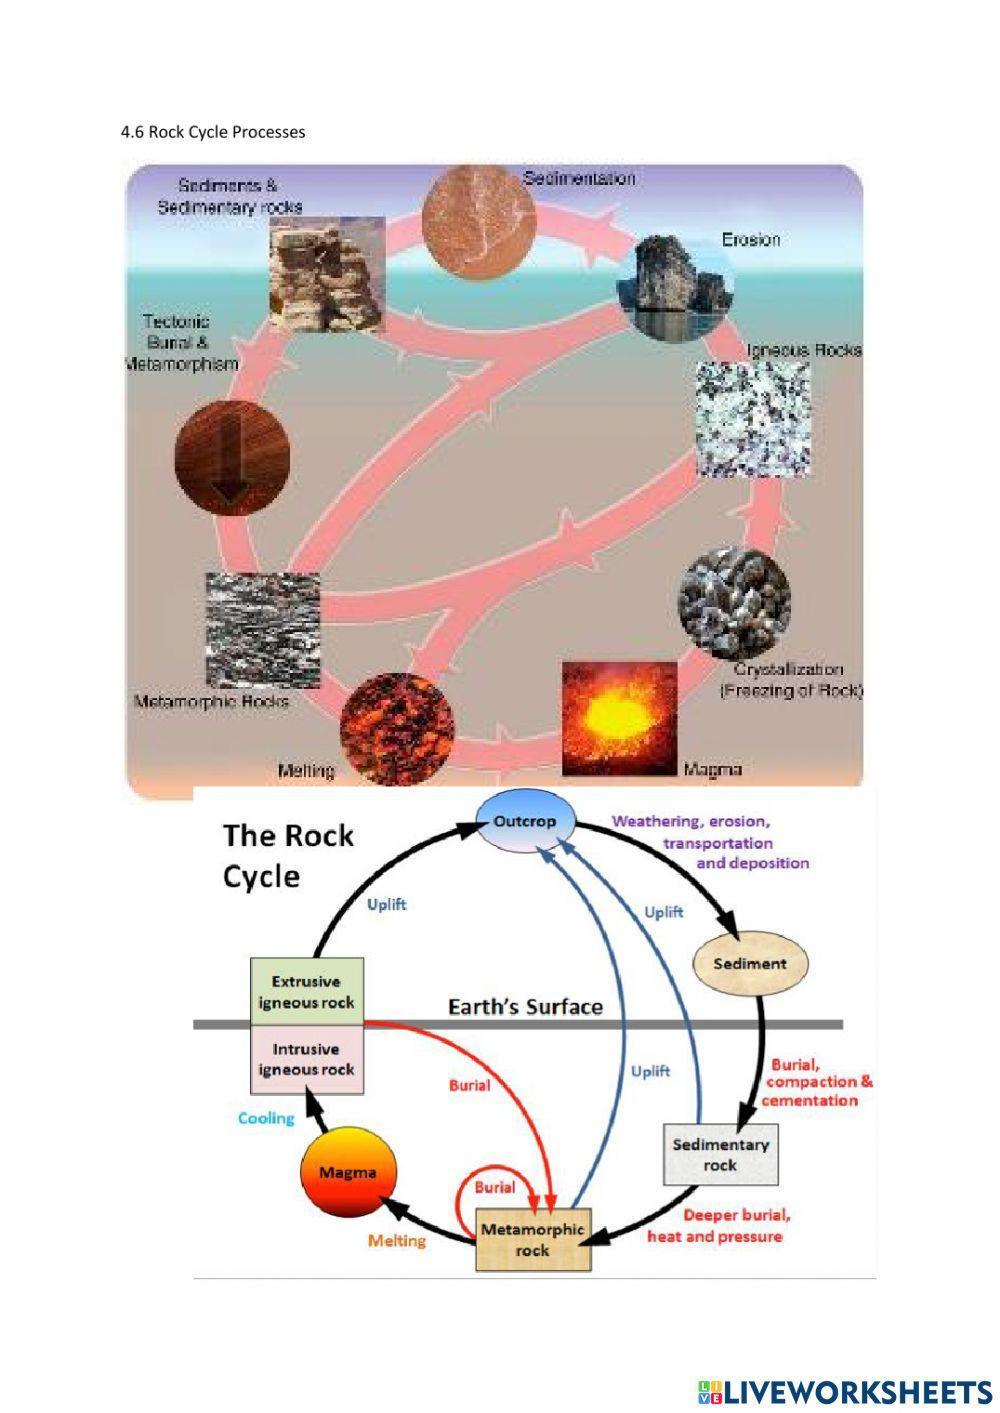 4.6 Rock Cycle Processes